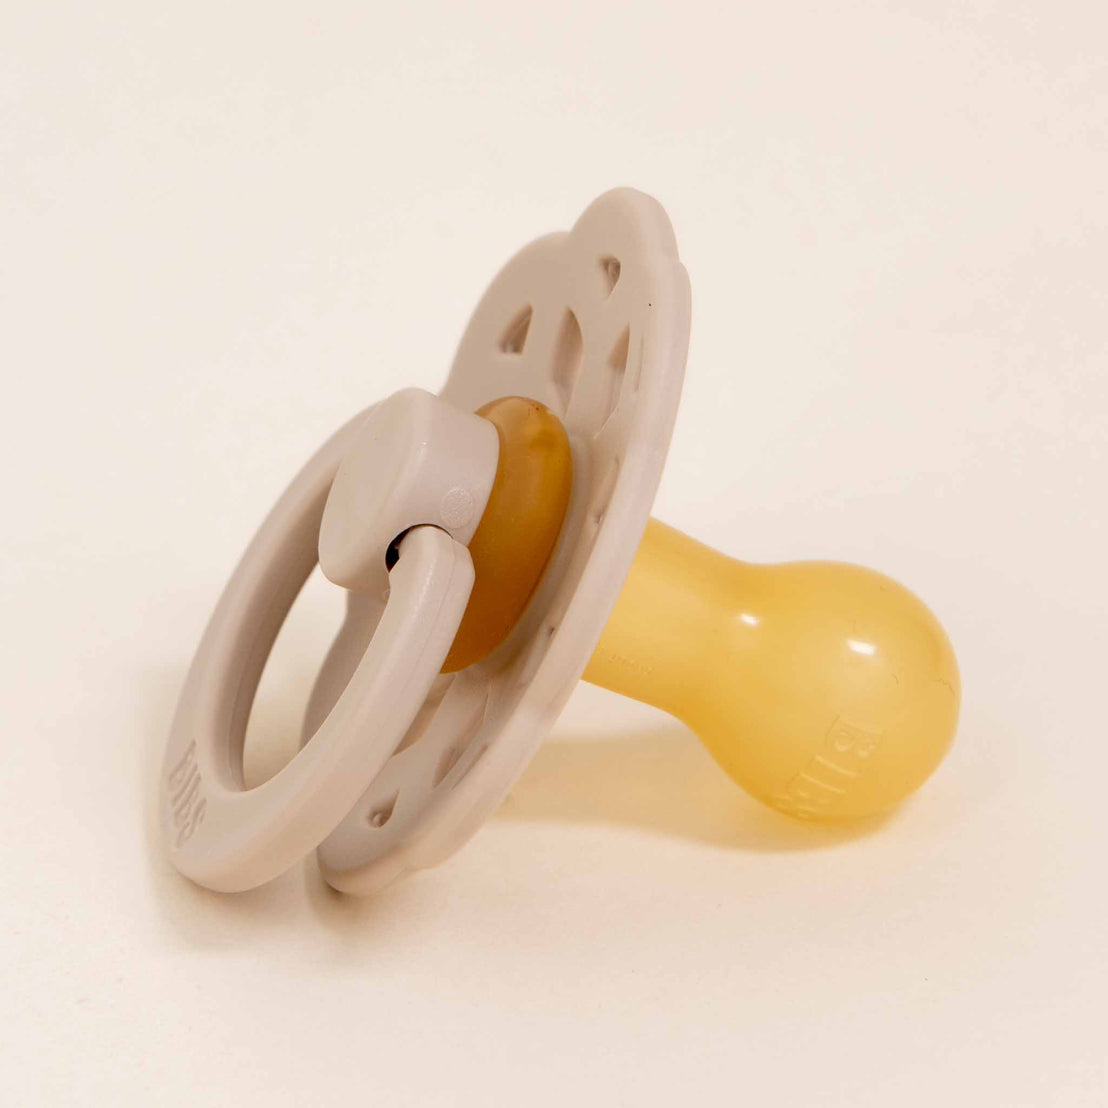 A Bibs Lace Pacifier in Vanilla with a beige handle and clear nipple, placed on a pale background.